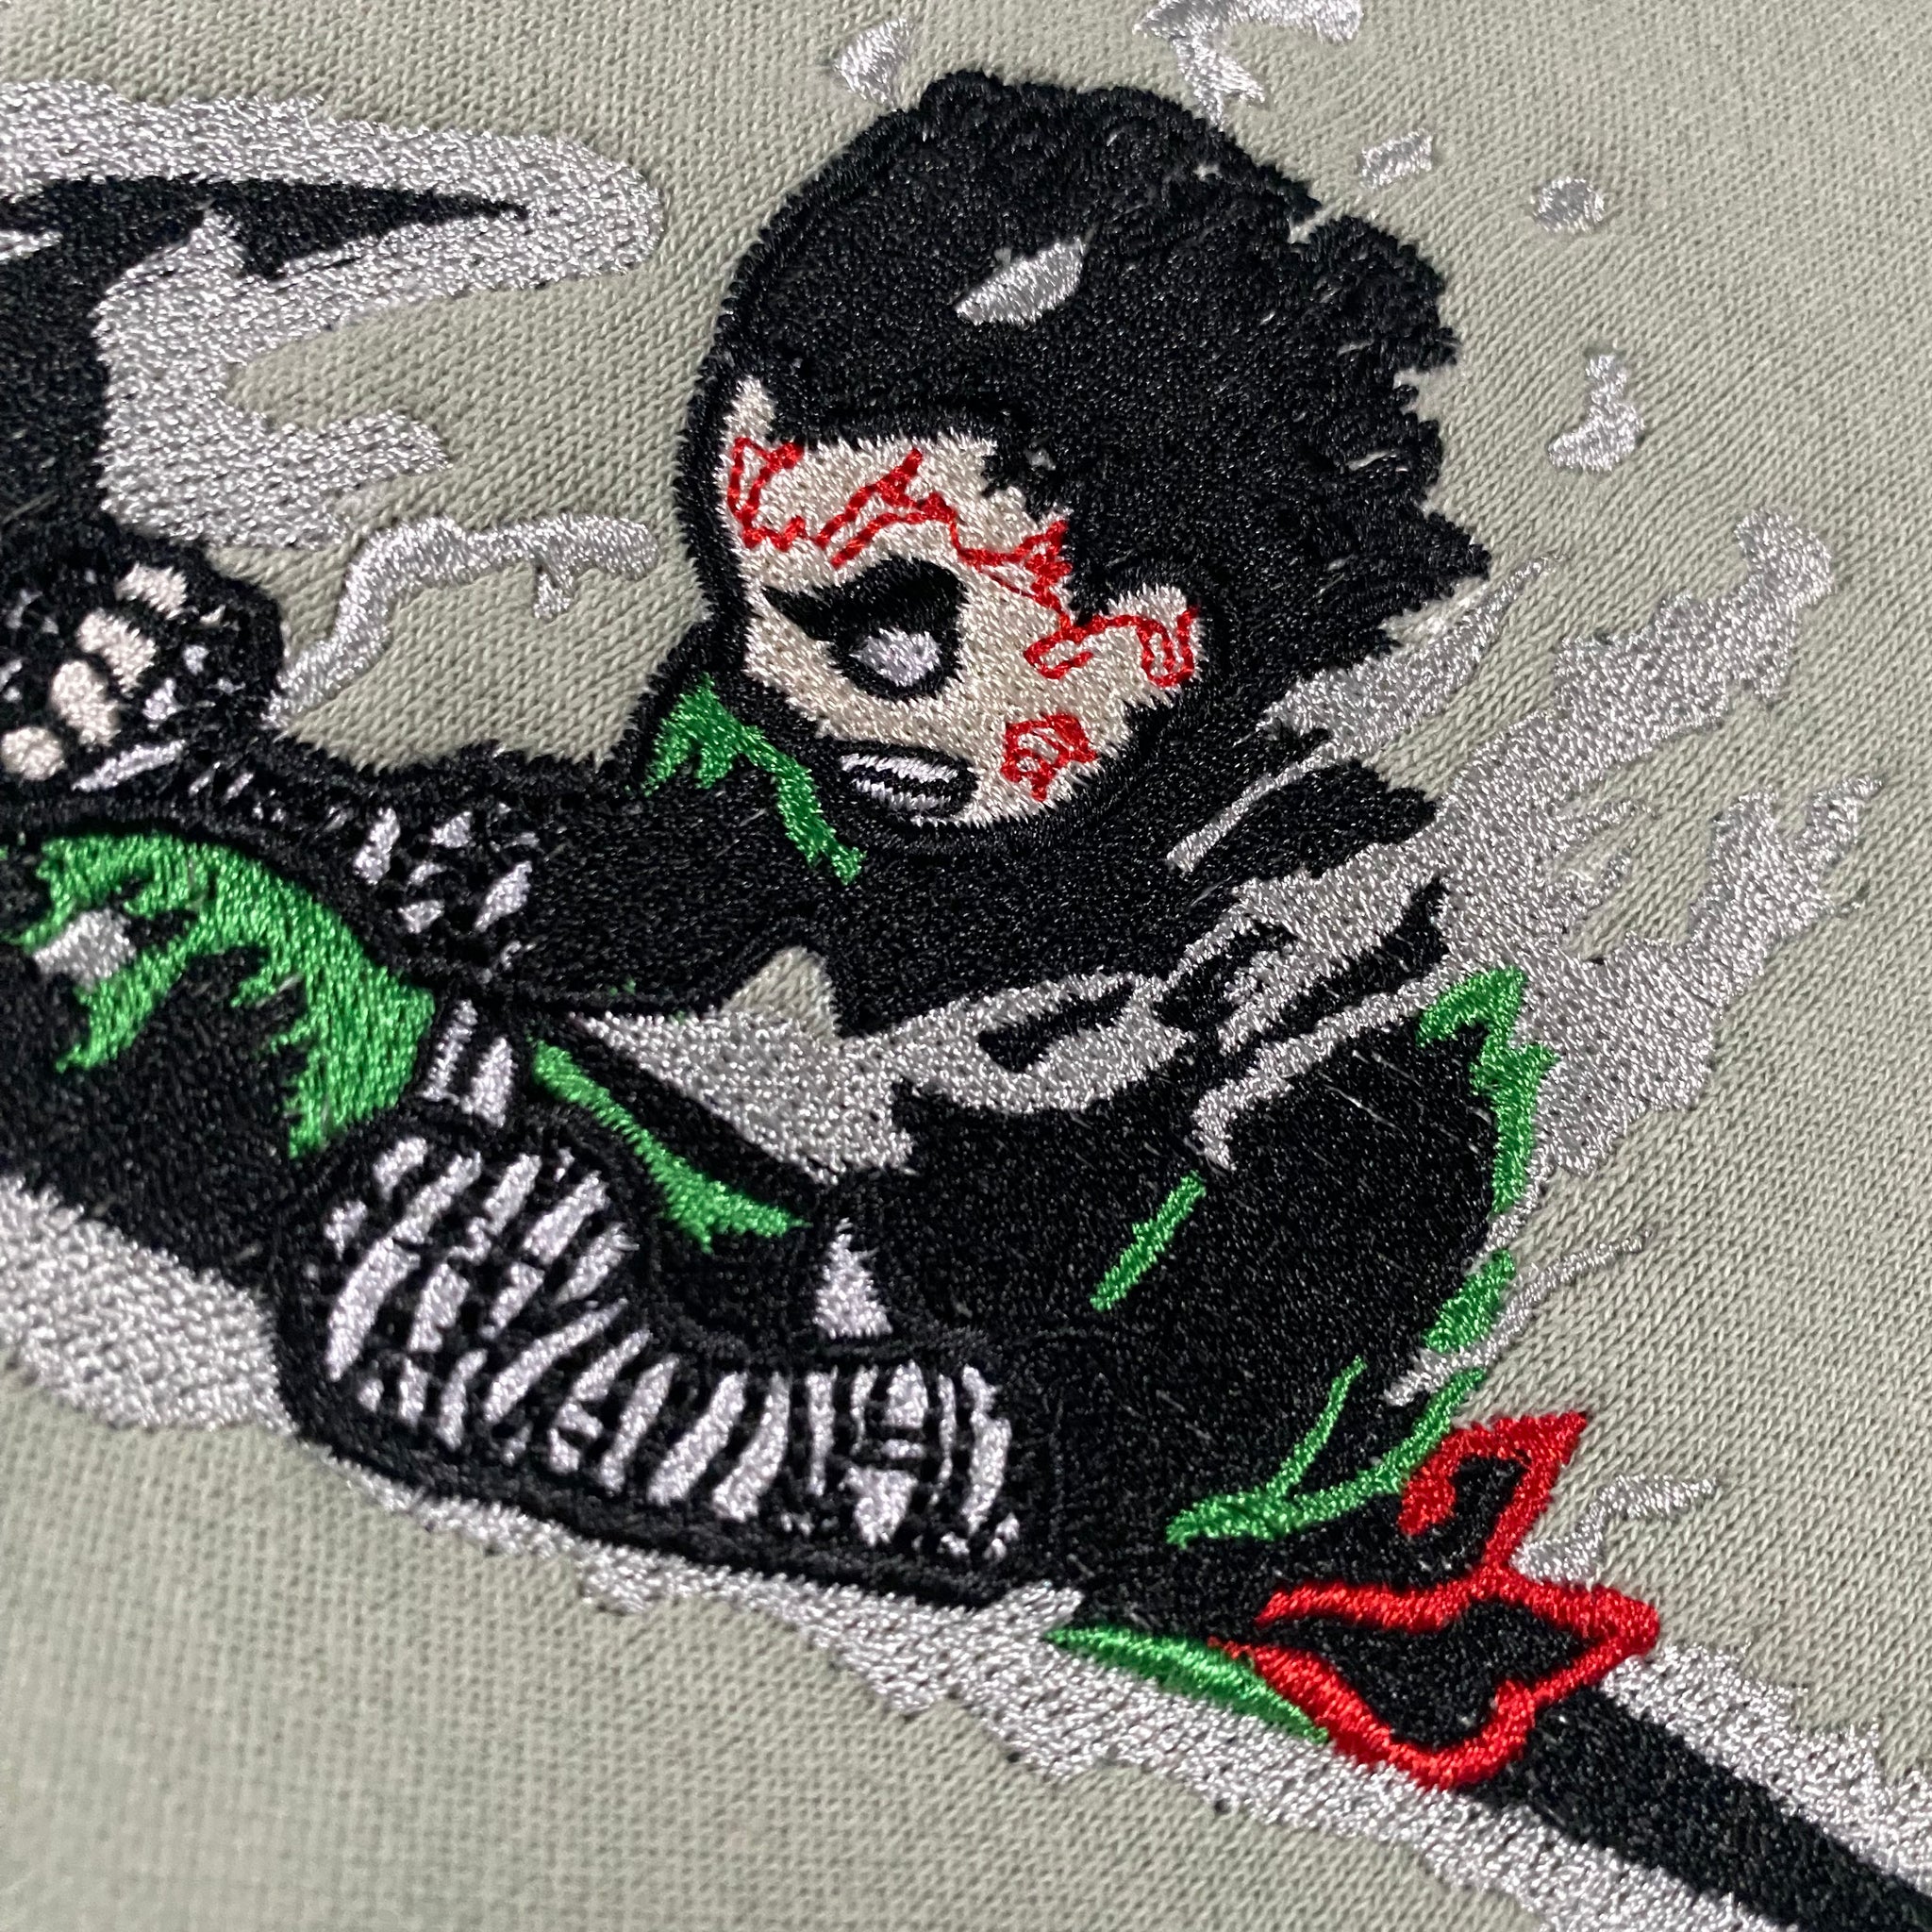 LIMITED Rock Inferno EMBROIDERED ANIME HOODIE